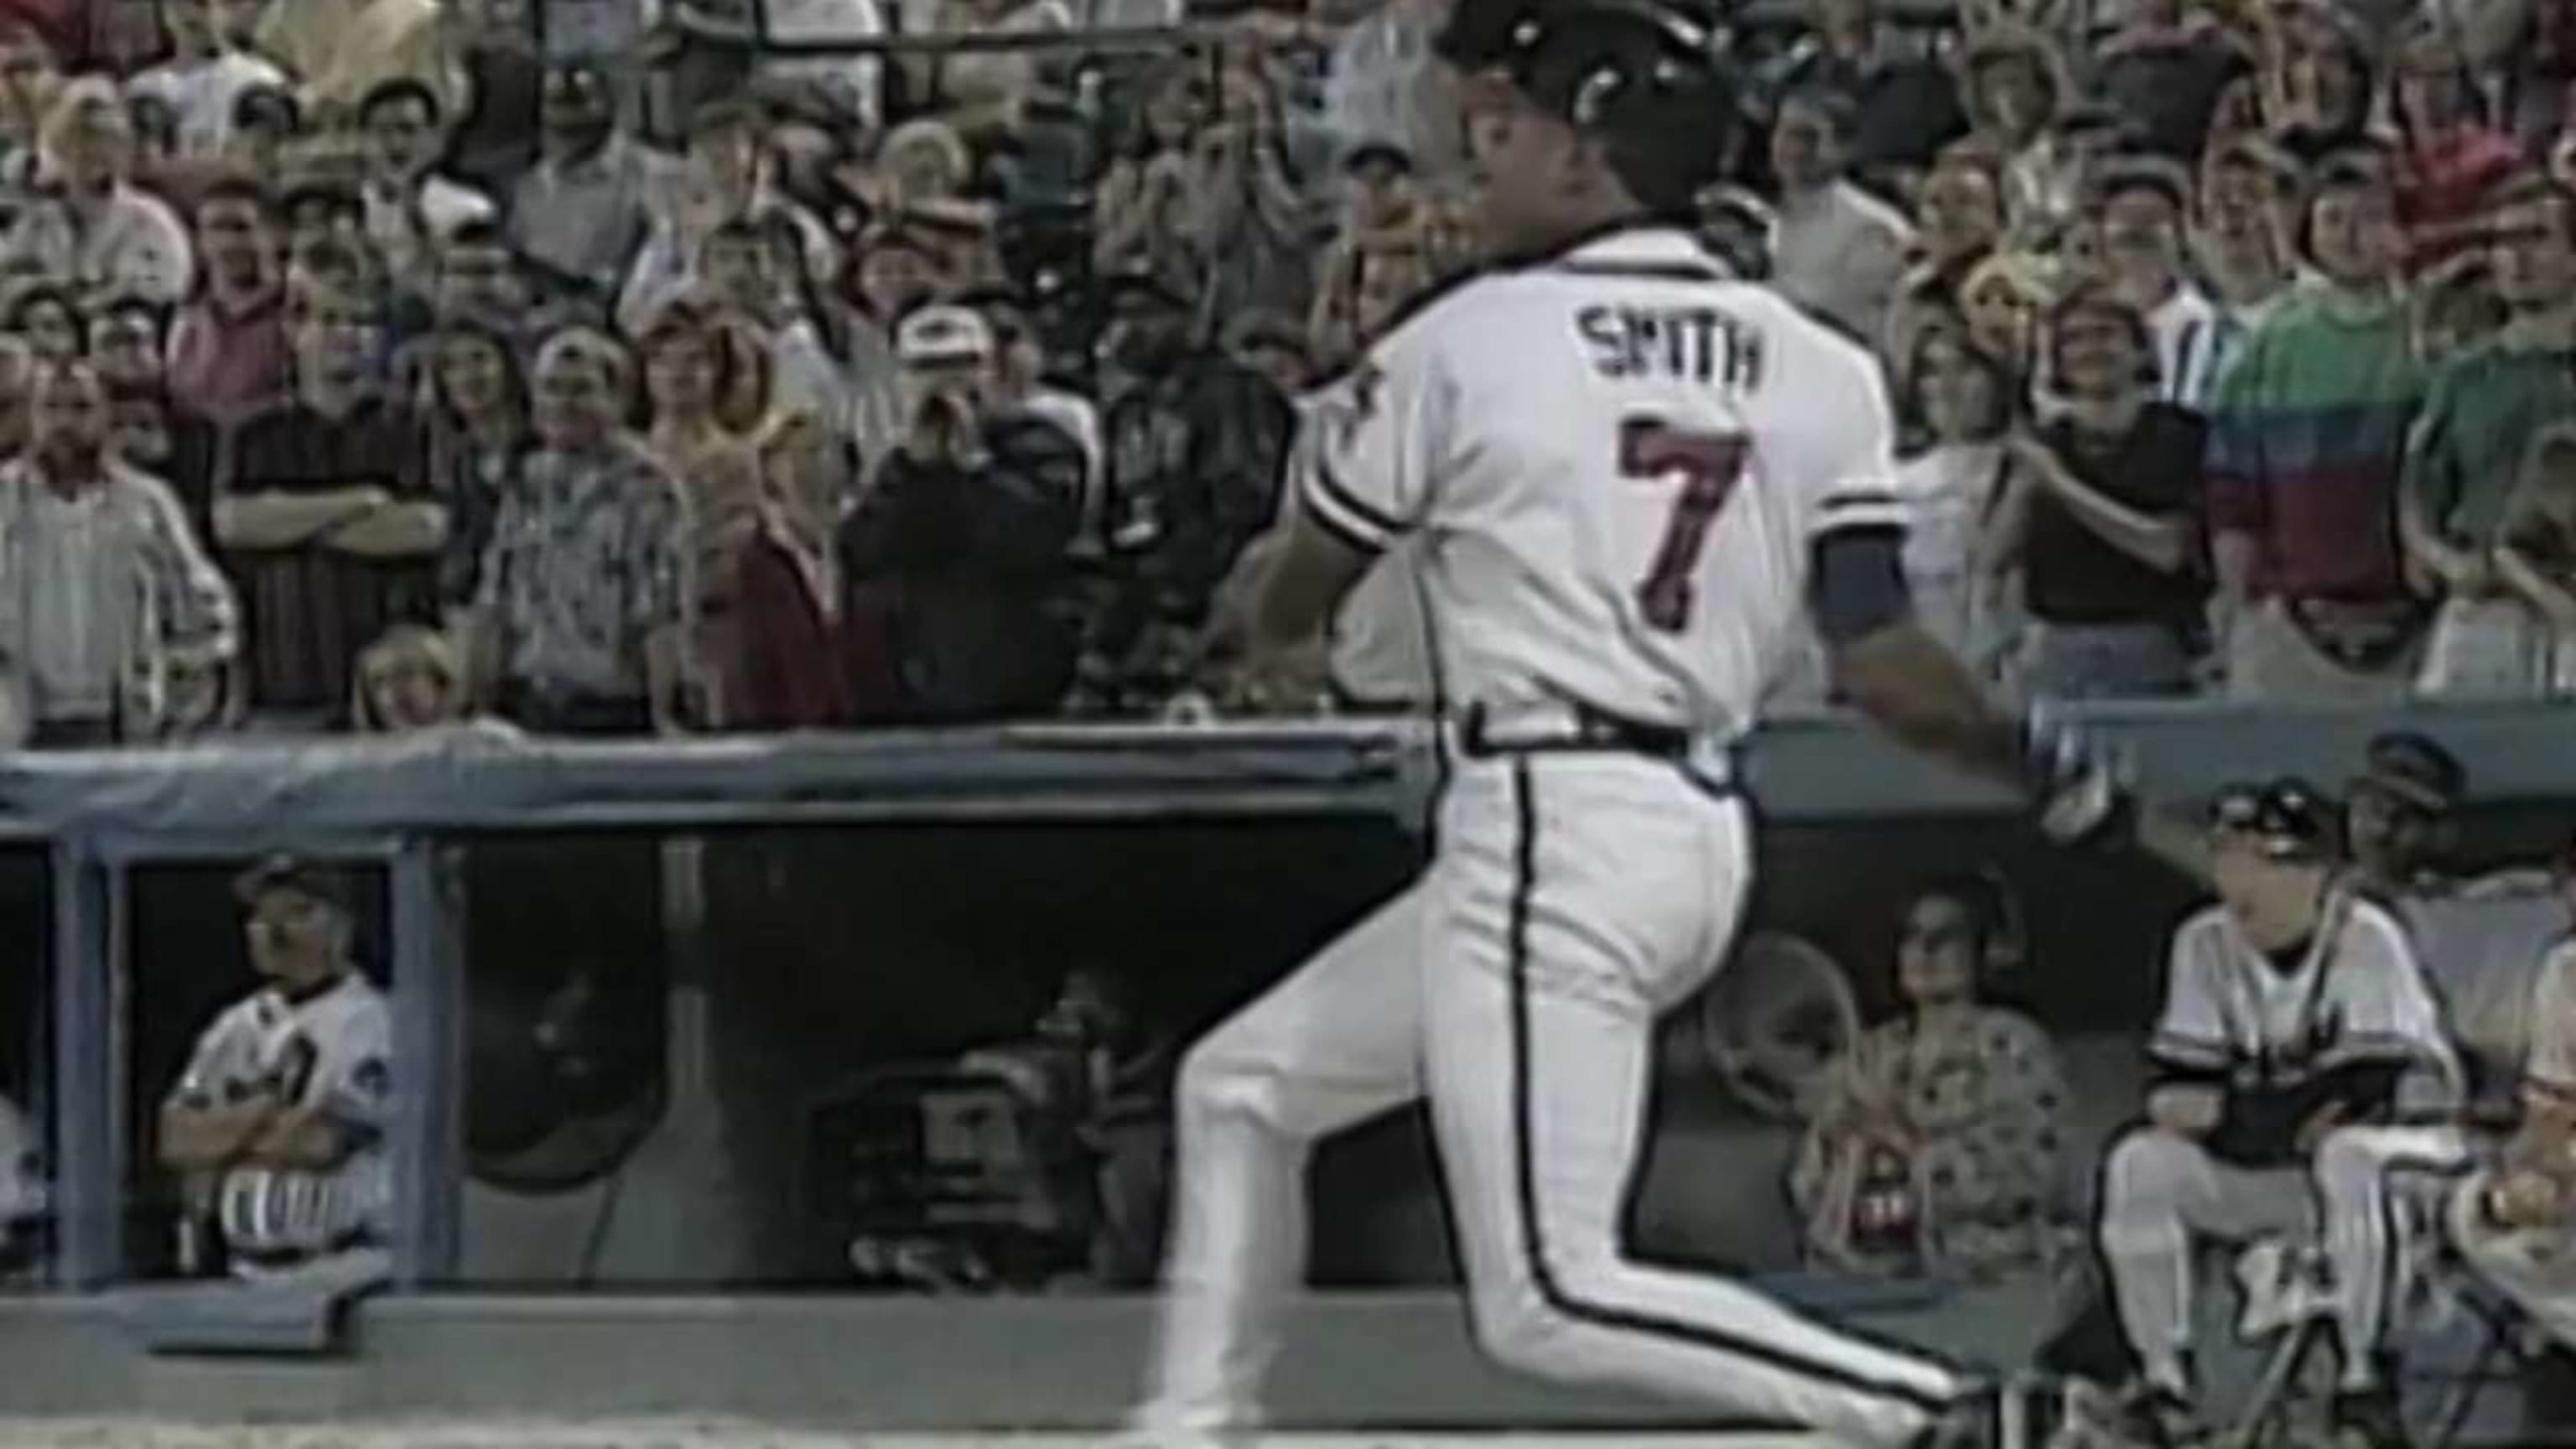 1995 WS Gm2: Chipper collects his first hit in the World Series 